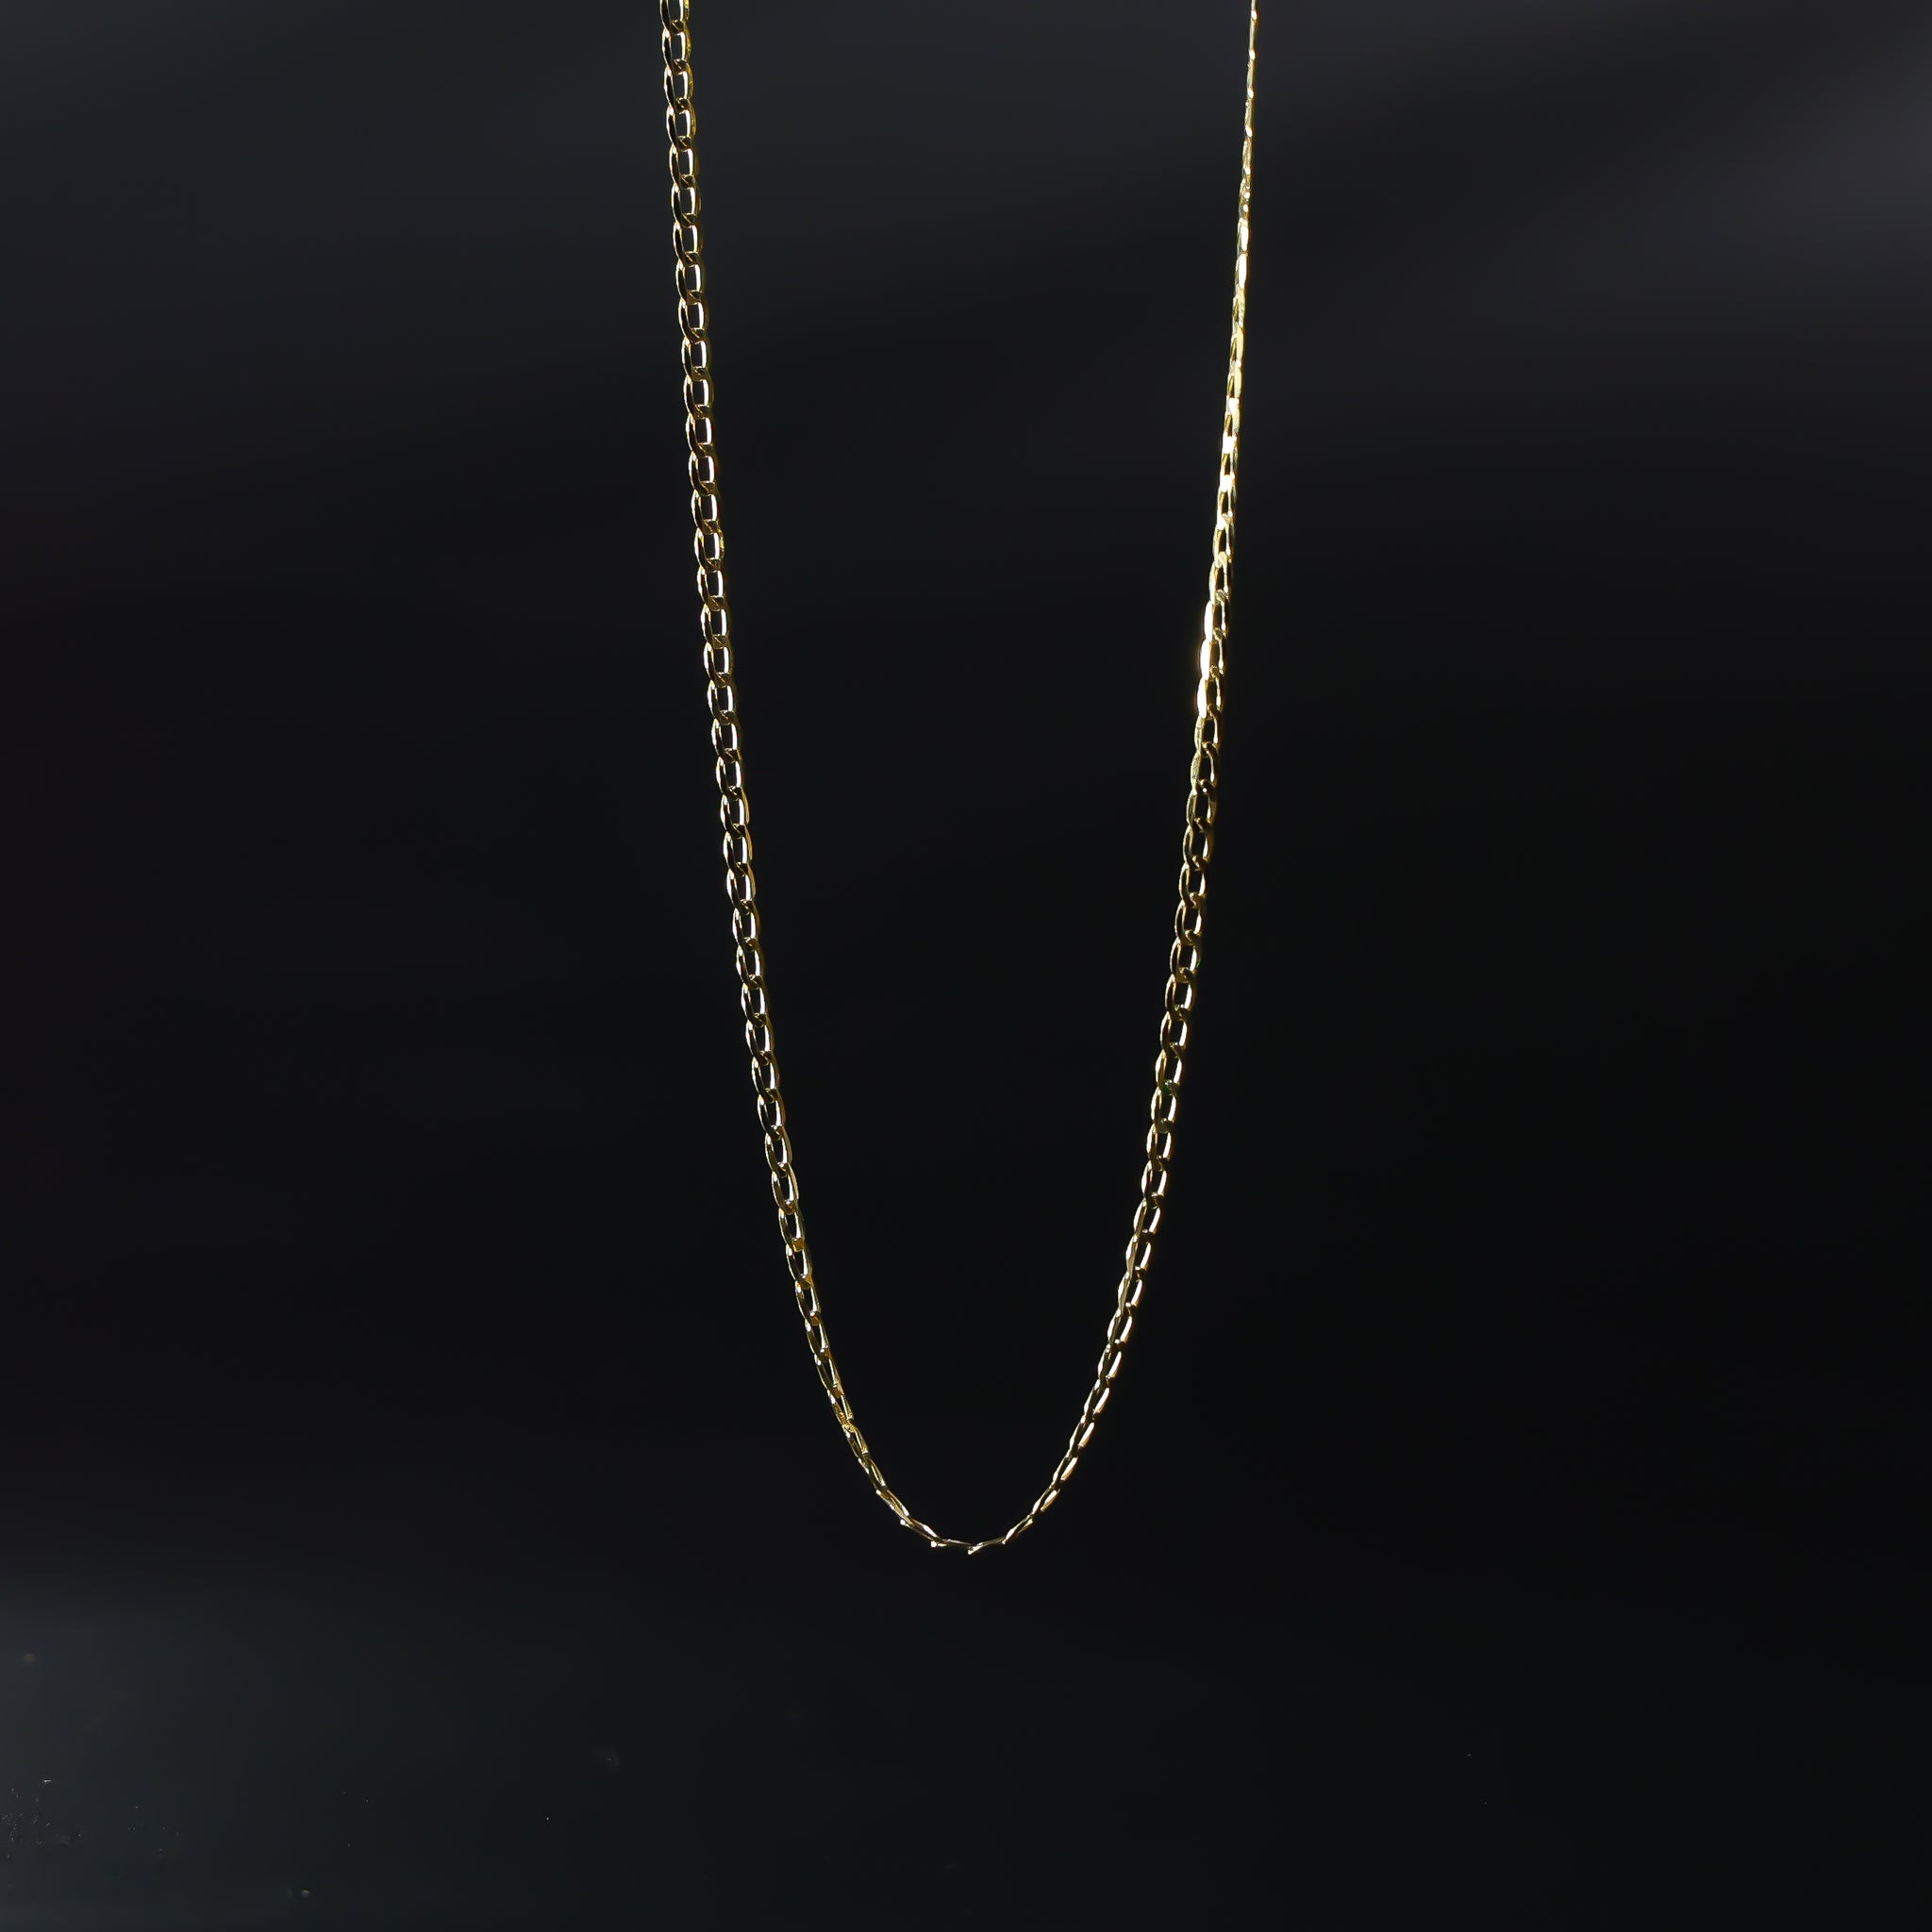 2mm Solid 14K Gold Figaro Link Chain Model-0490 - Charlie & Co. Jewelry